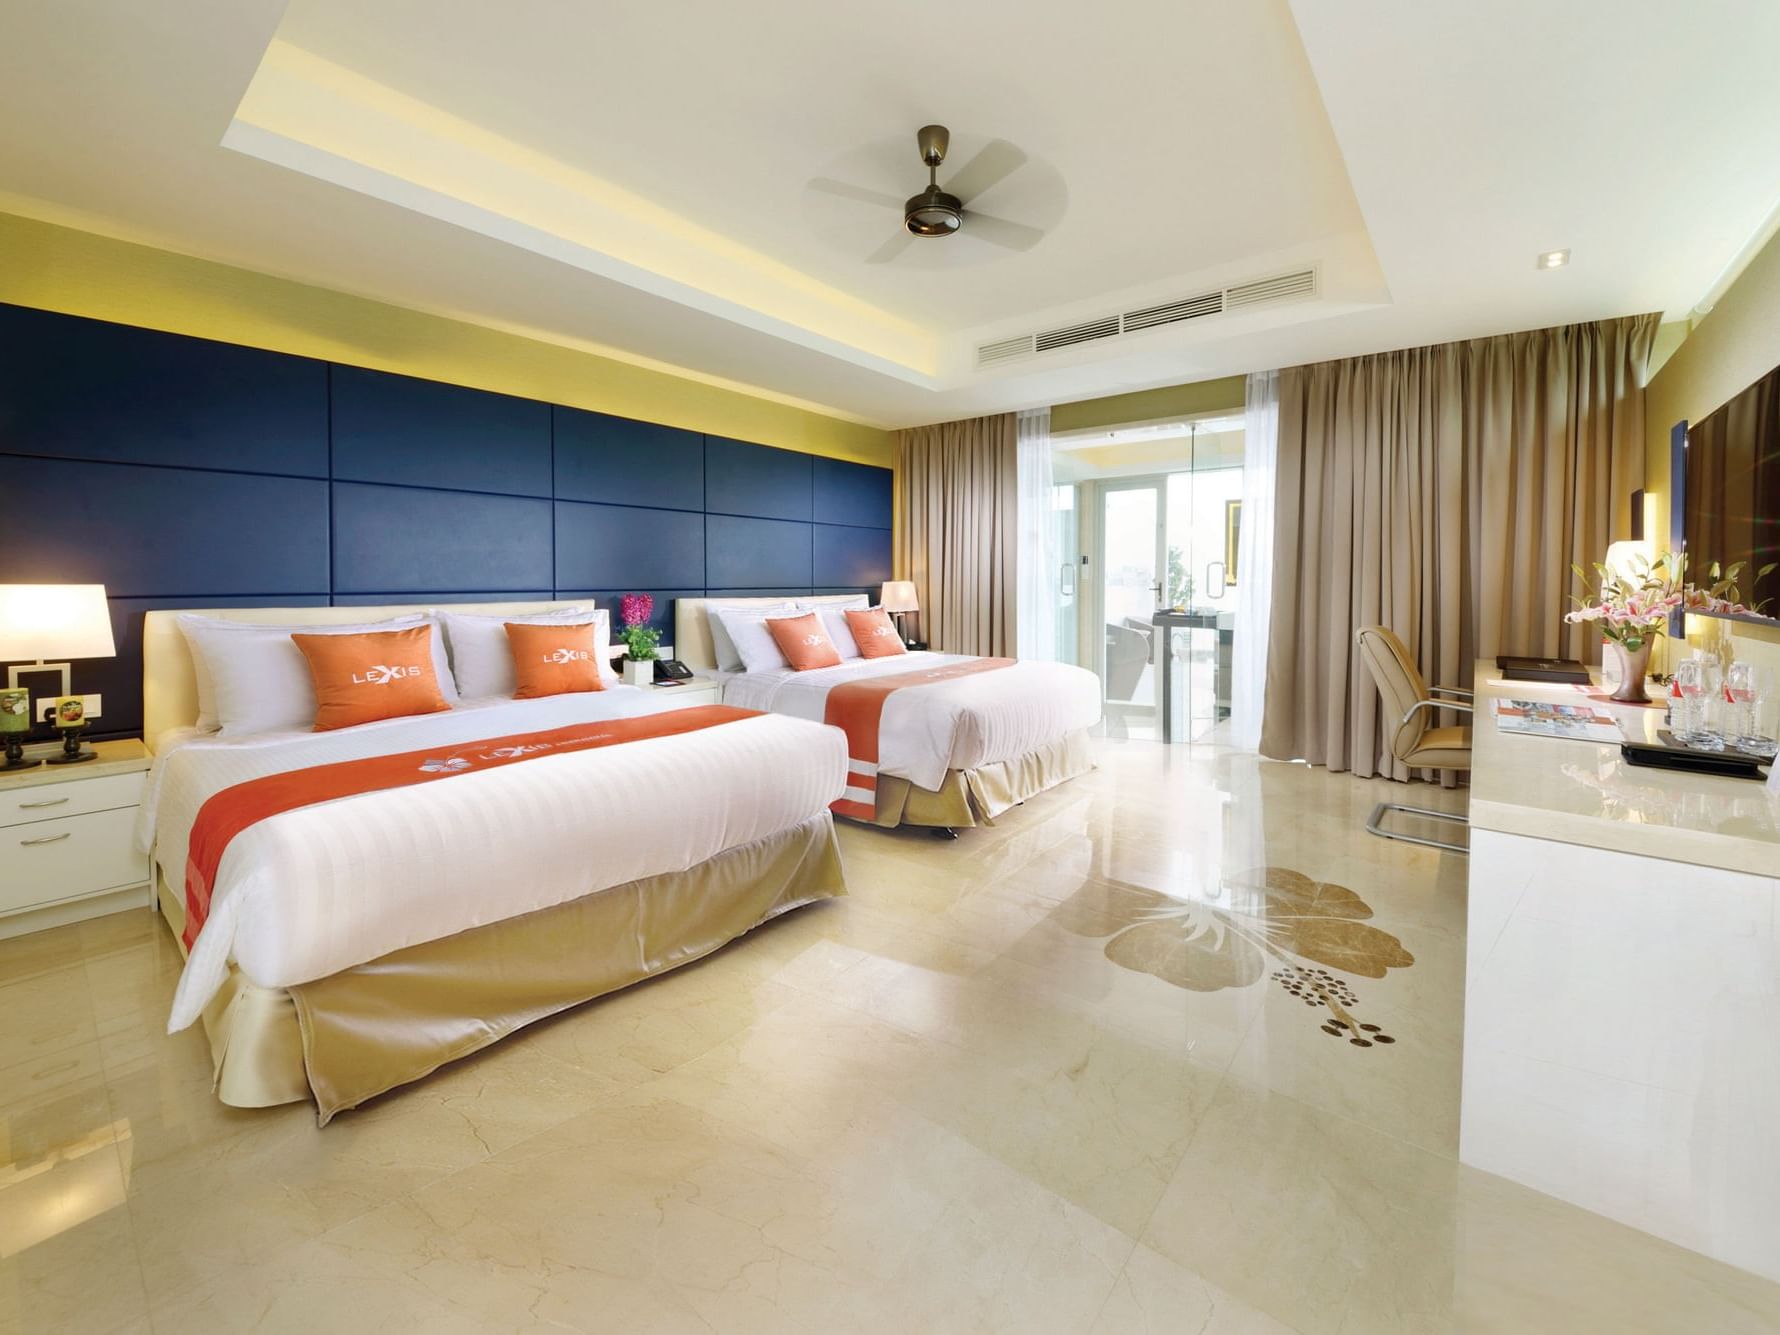 Executive Pool Villa room with two king size bed - Lexis Hibiscus® Port Dickson